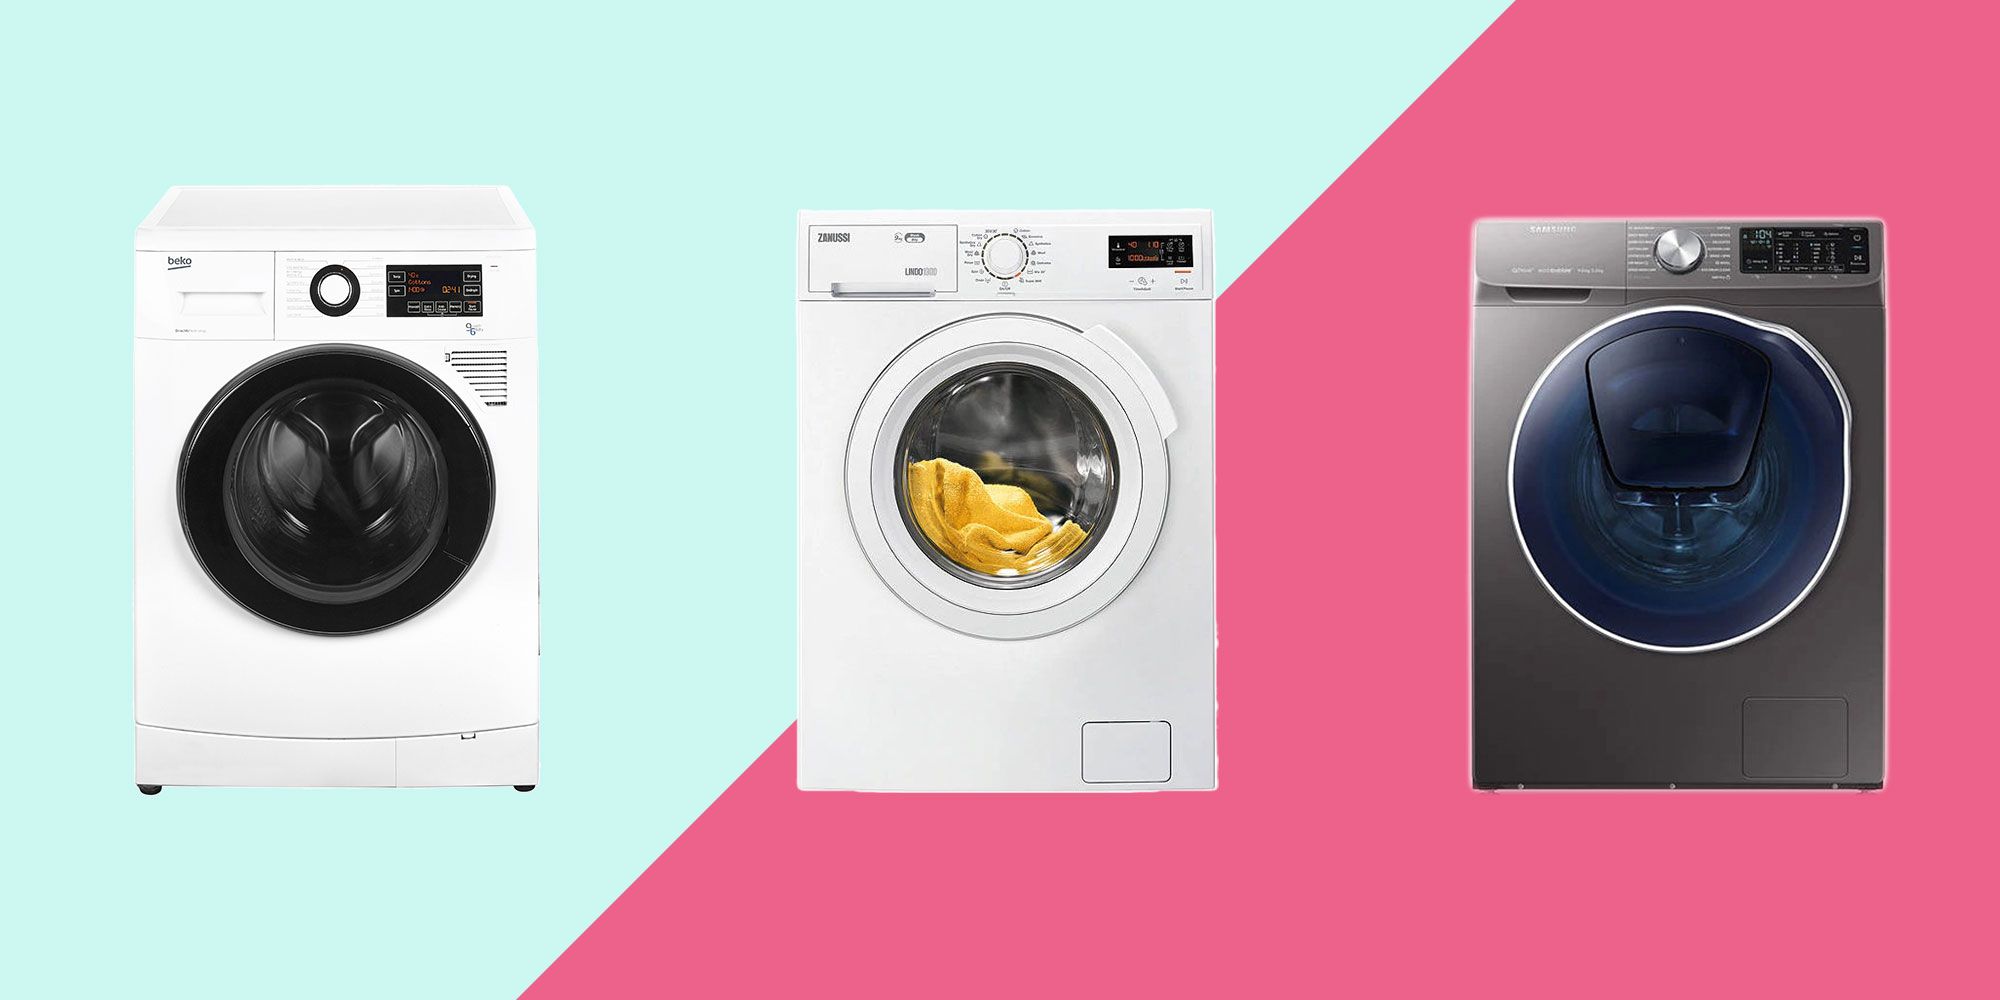 Spin Dry vs. Tumble Dry - Differences and When to Use Each